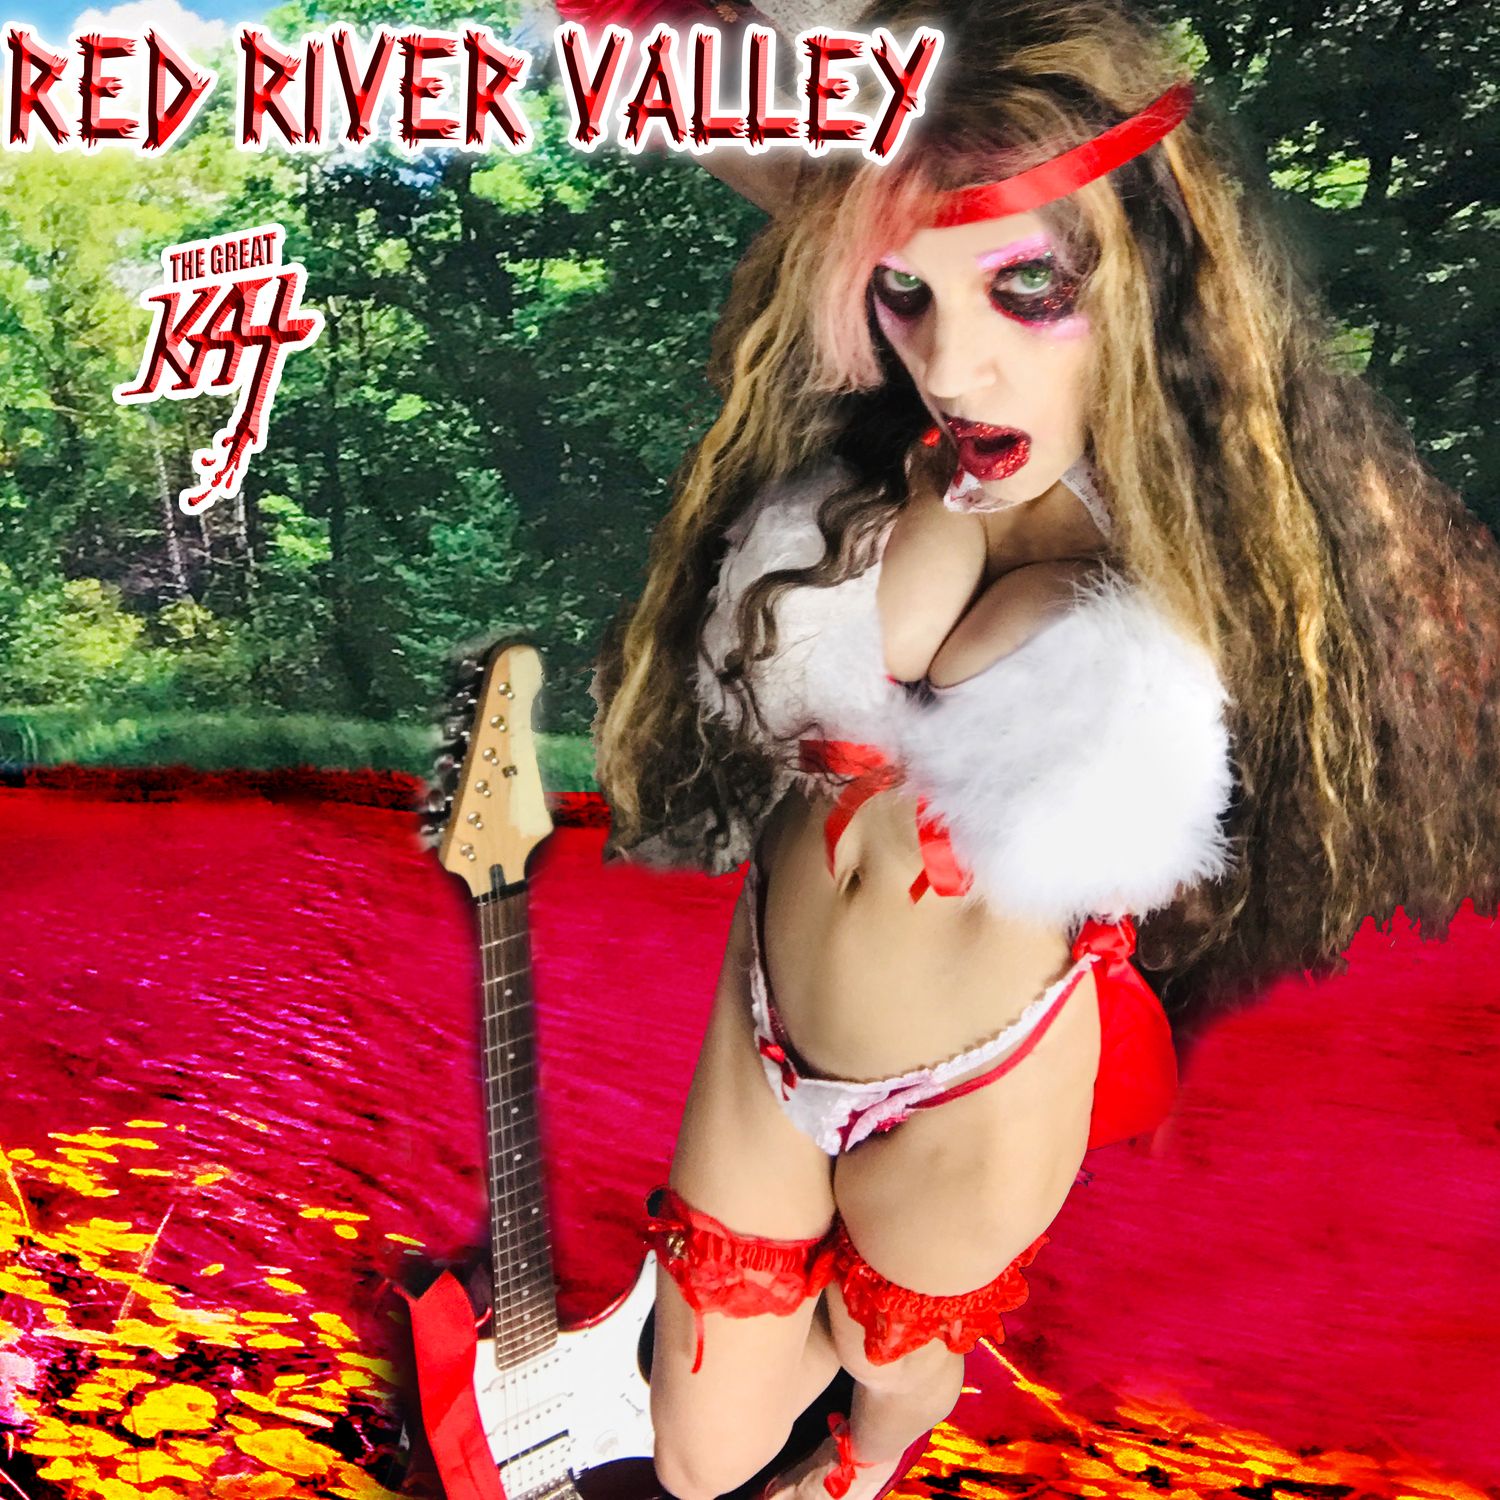 "RED RIVER VALLEY"!! HOT KAT 8x10 Glossy Color Photo! Personalized Autographed by THE GREAT KAT!